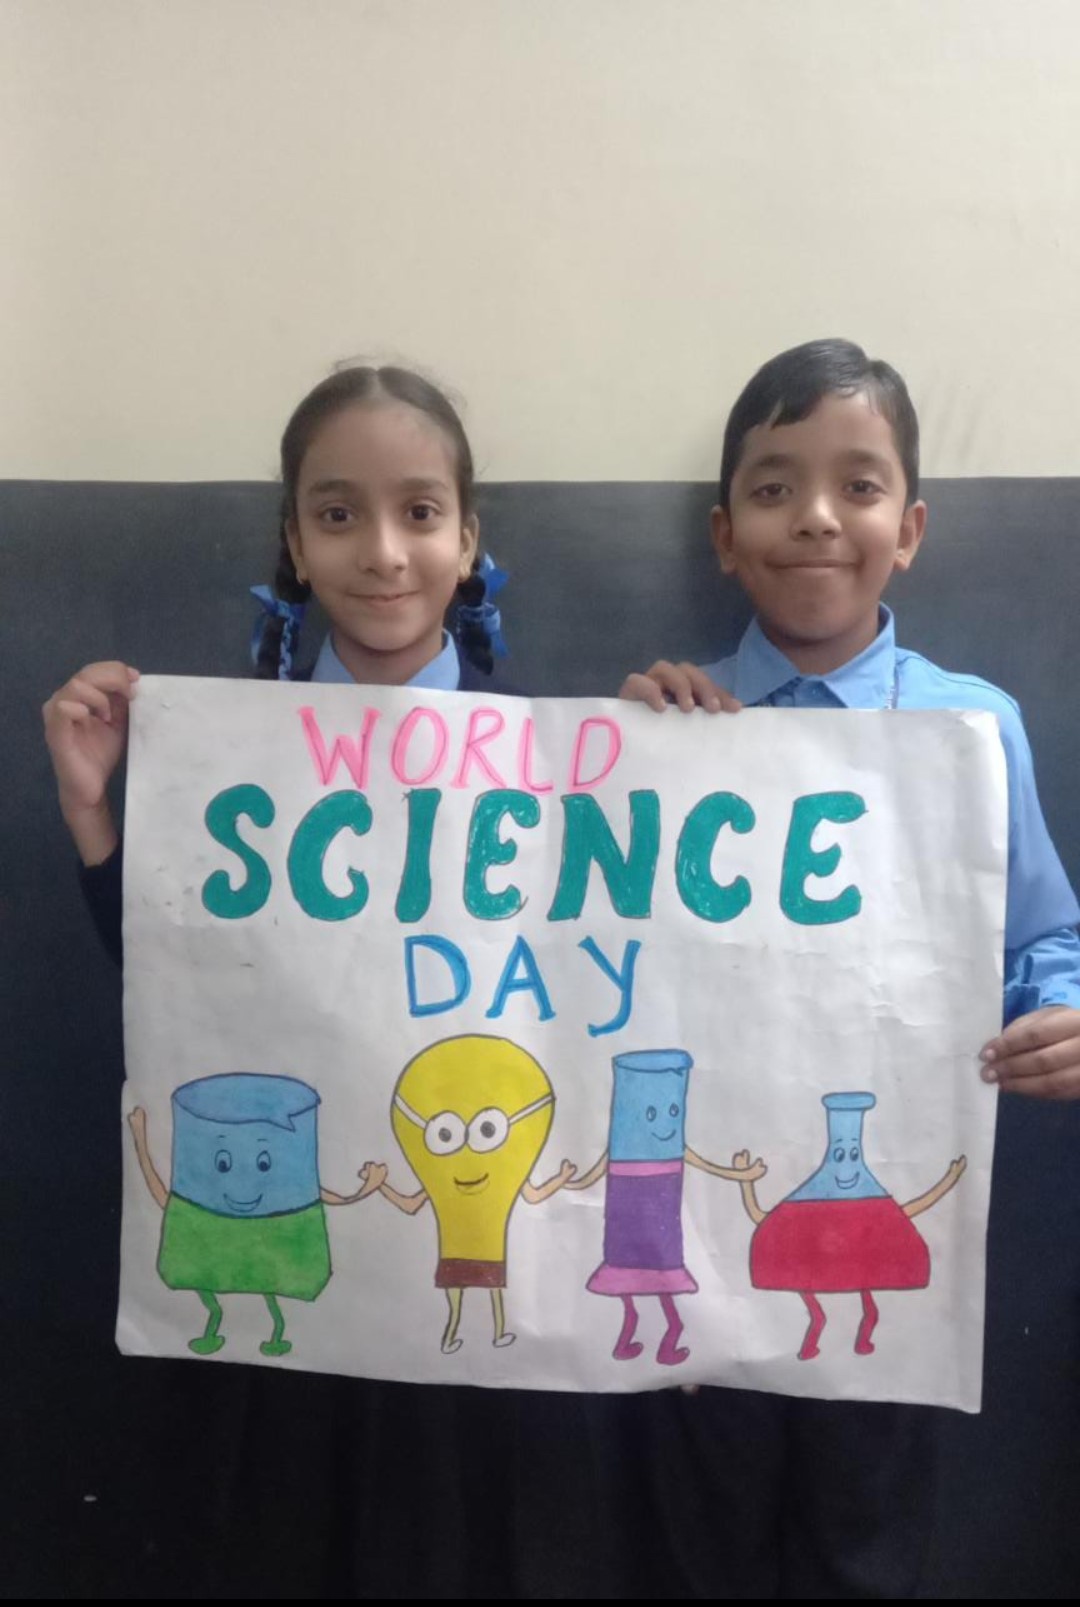 WORLD SCIENCE DAY